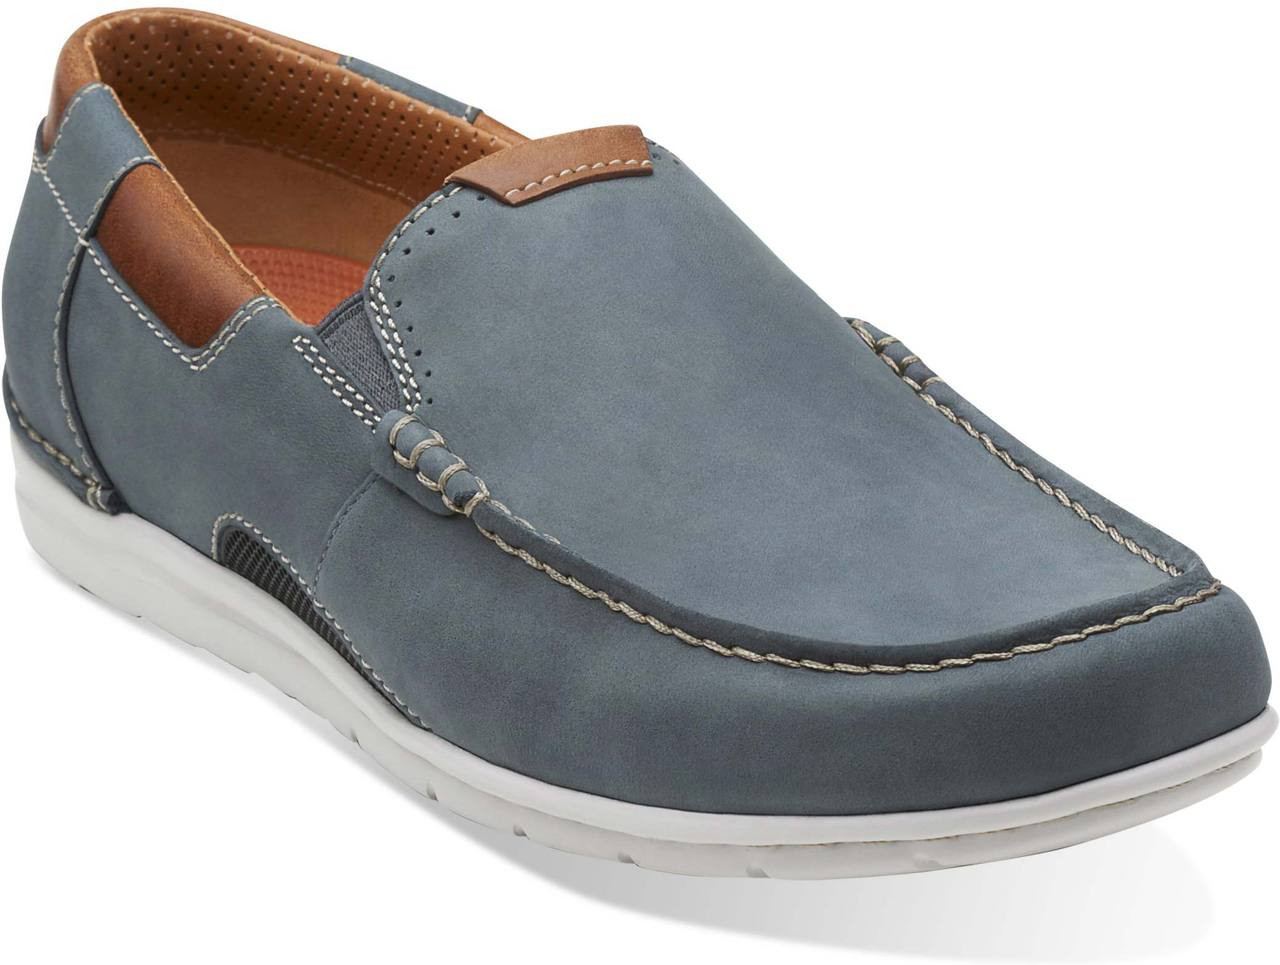 Clarks Unstructured Men's Un.Graysen Free - FREE Shipping & FREE ...